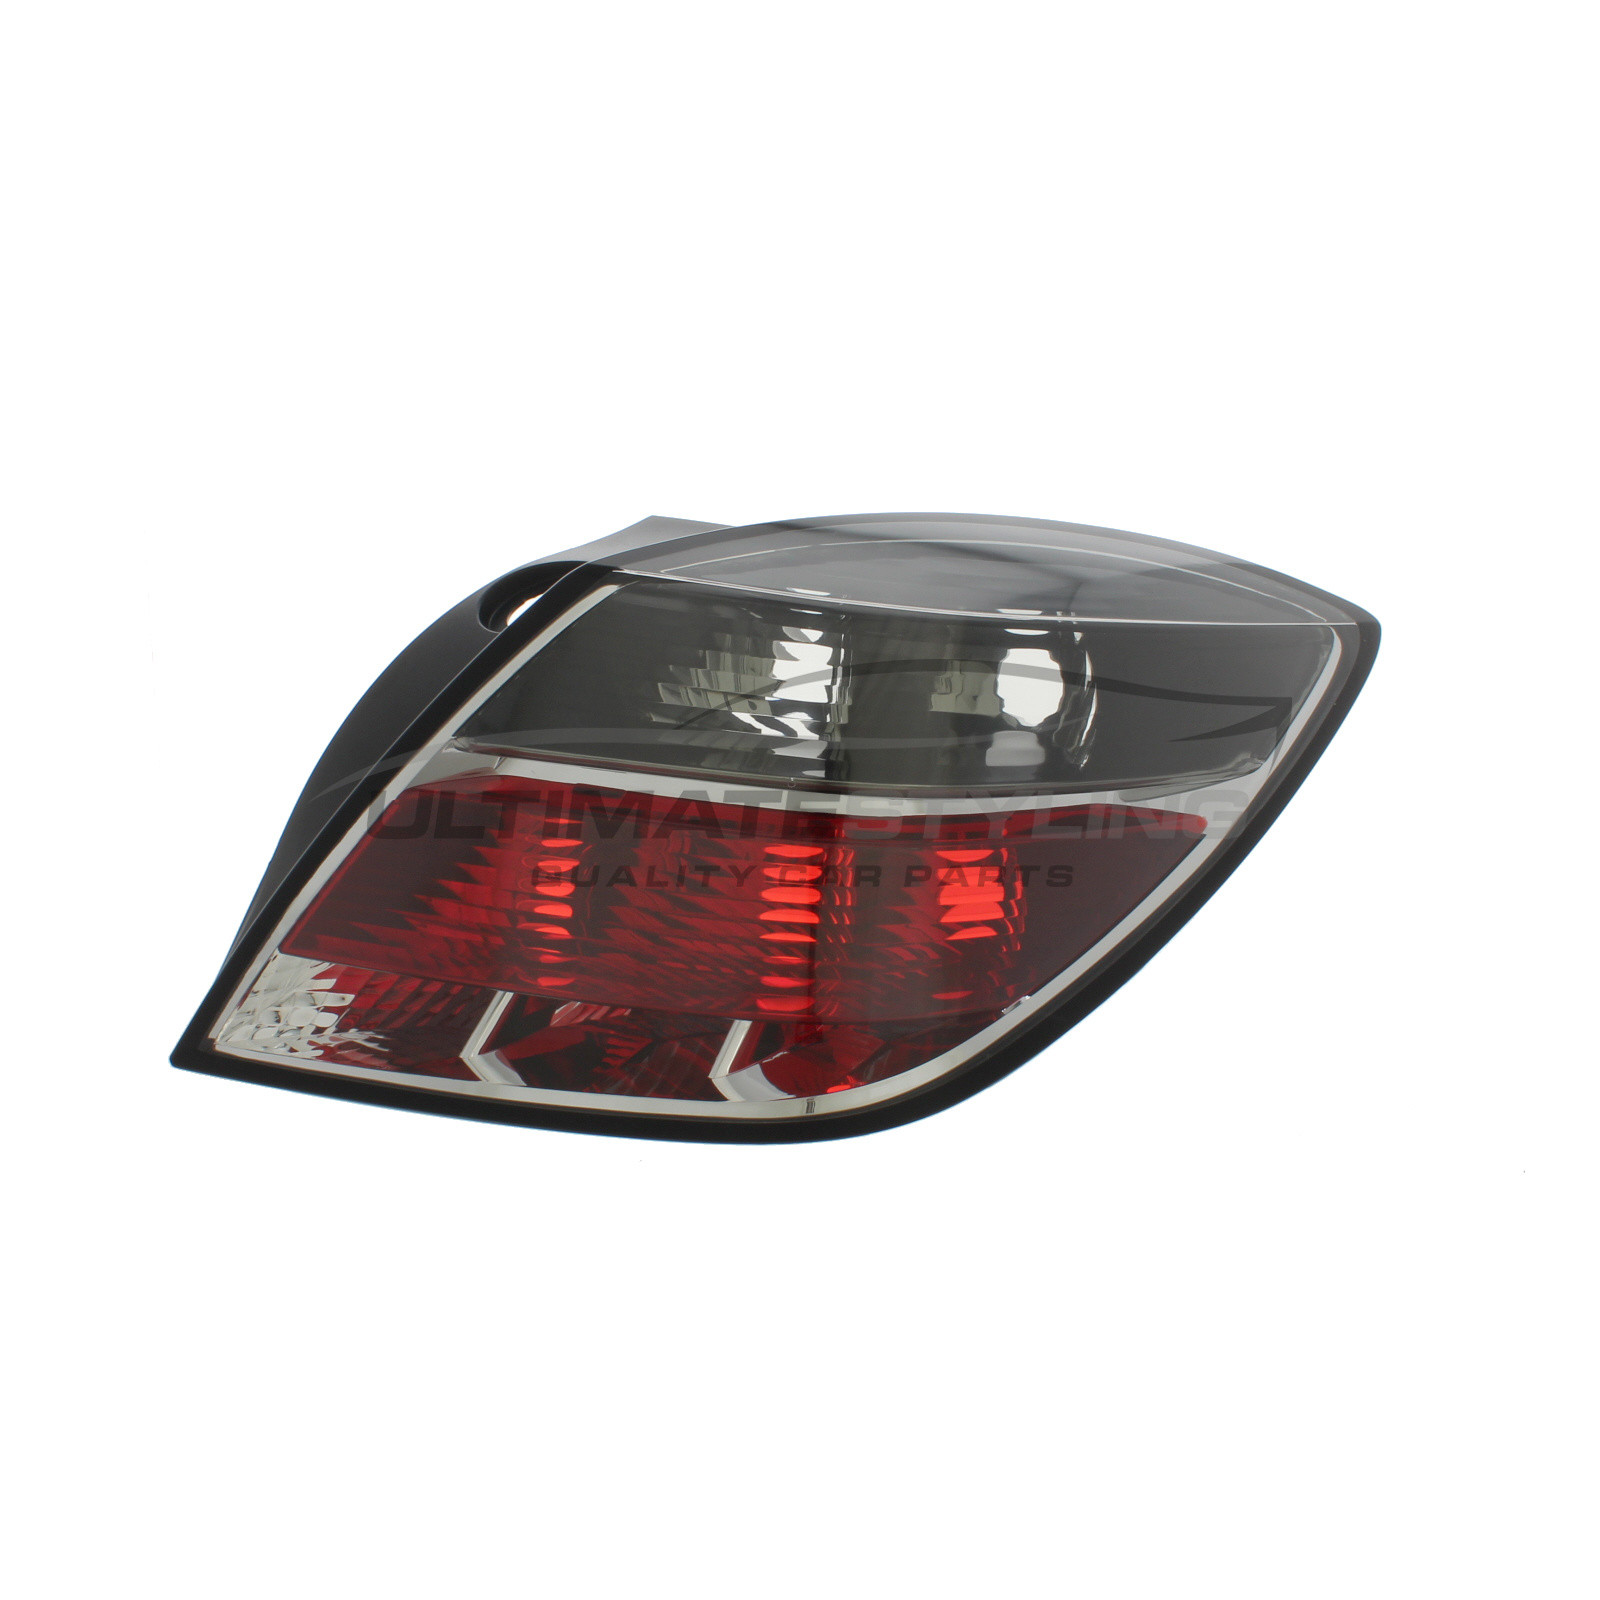 Rear Light / Tail Light for Vauxhall Astra